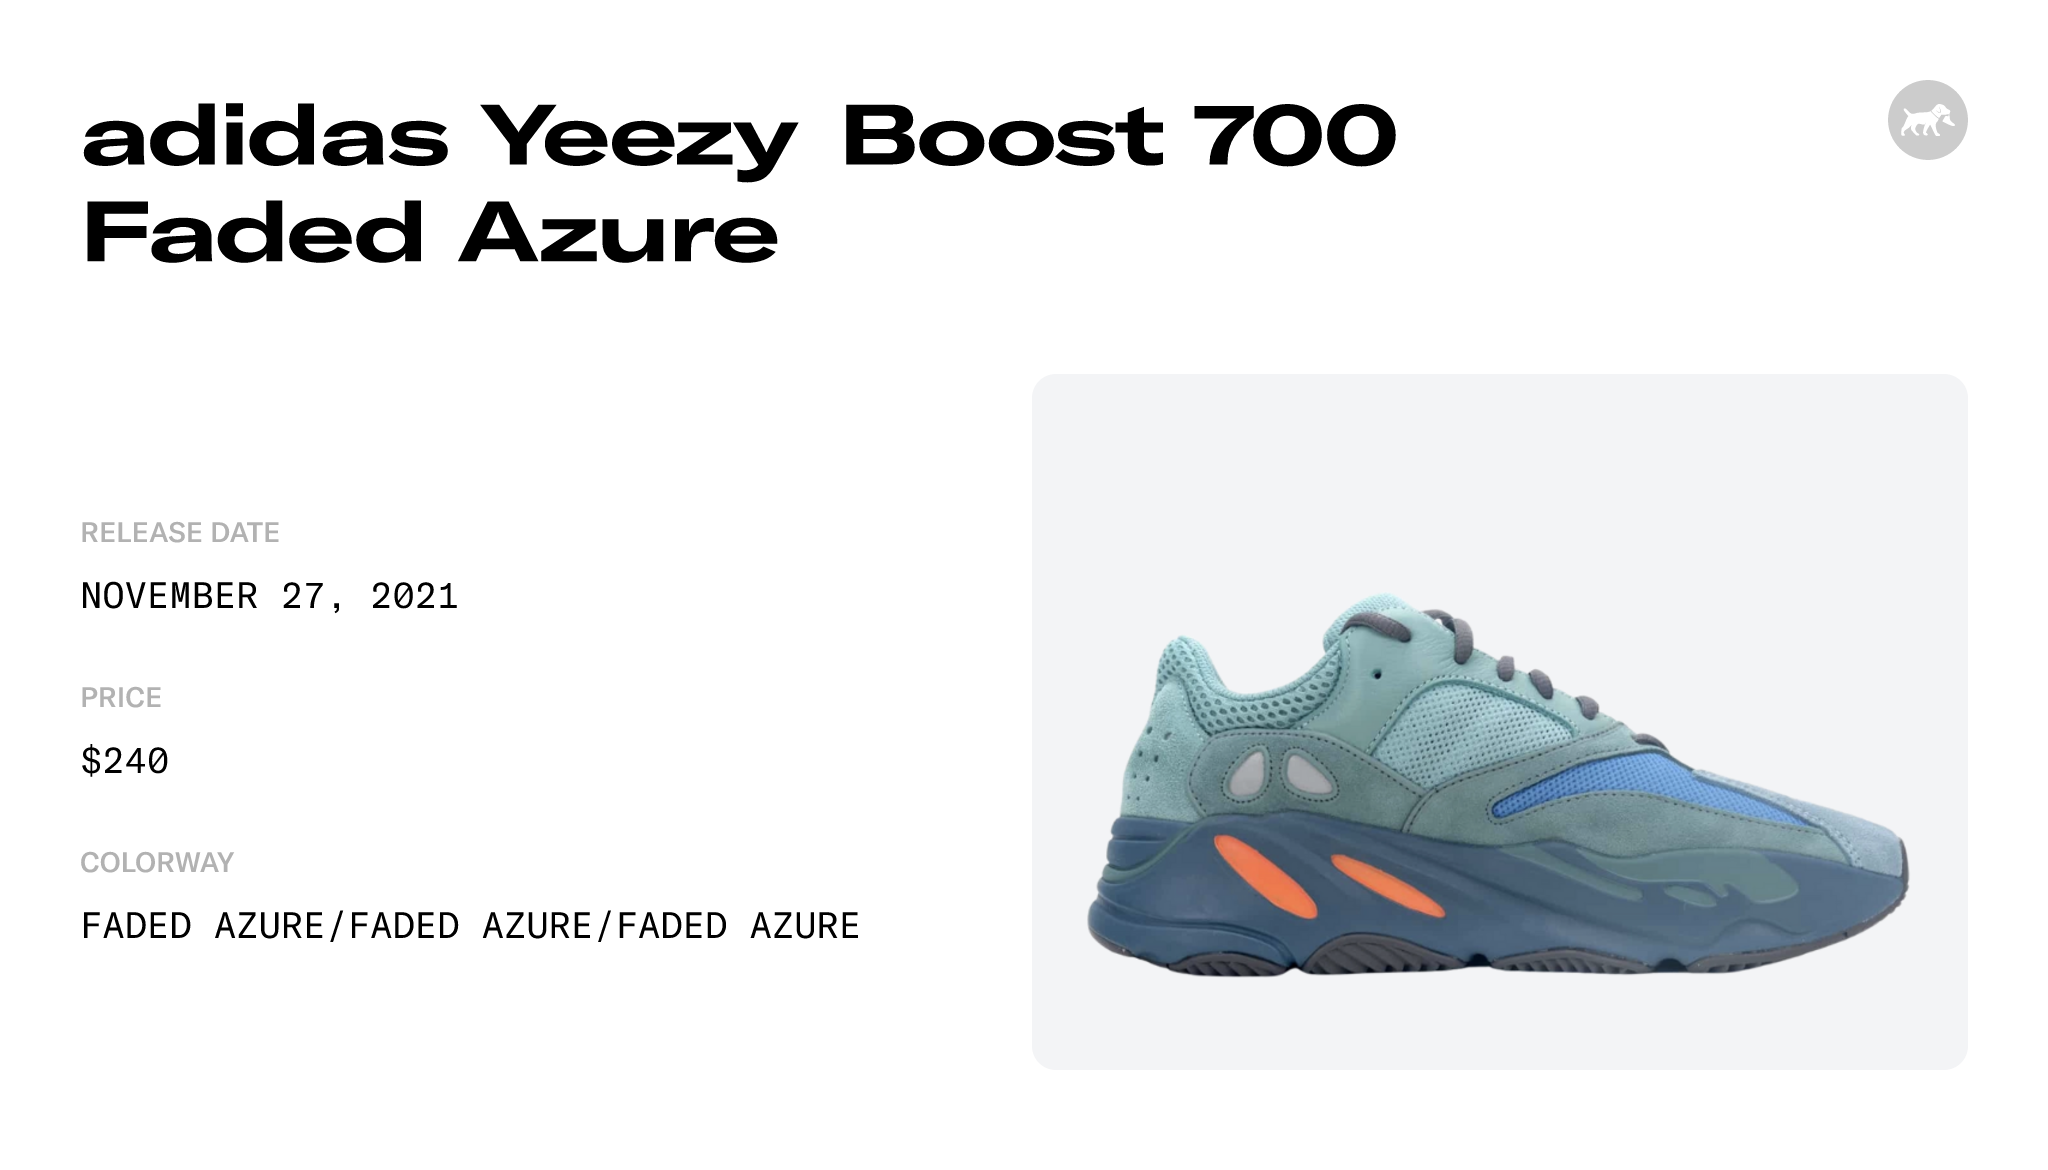 adidas Yeezy Boost 700 Faded Azure - GZ2002 Raffles and Release Date